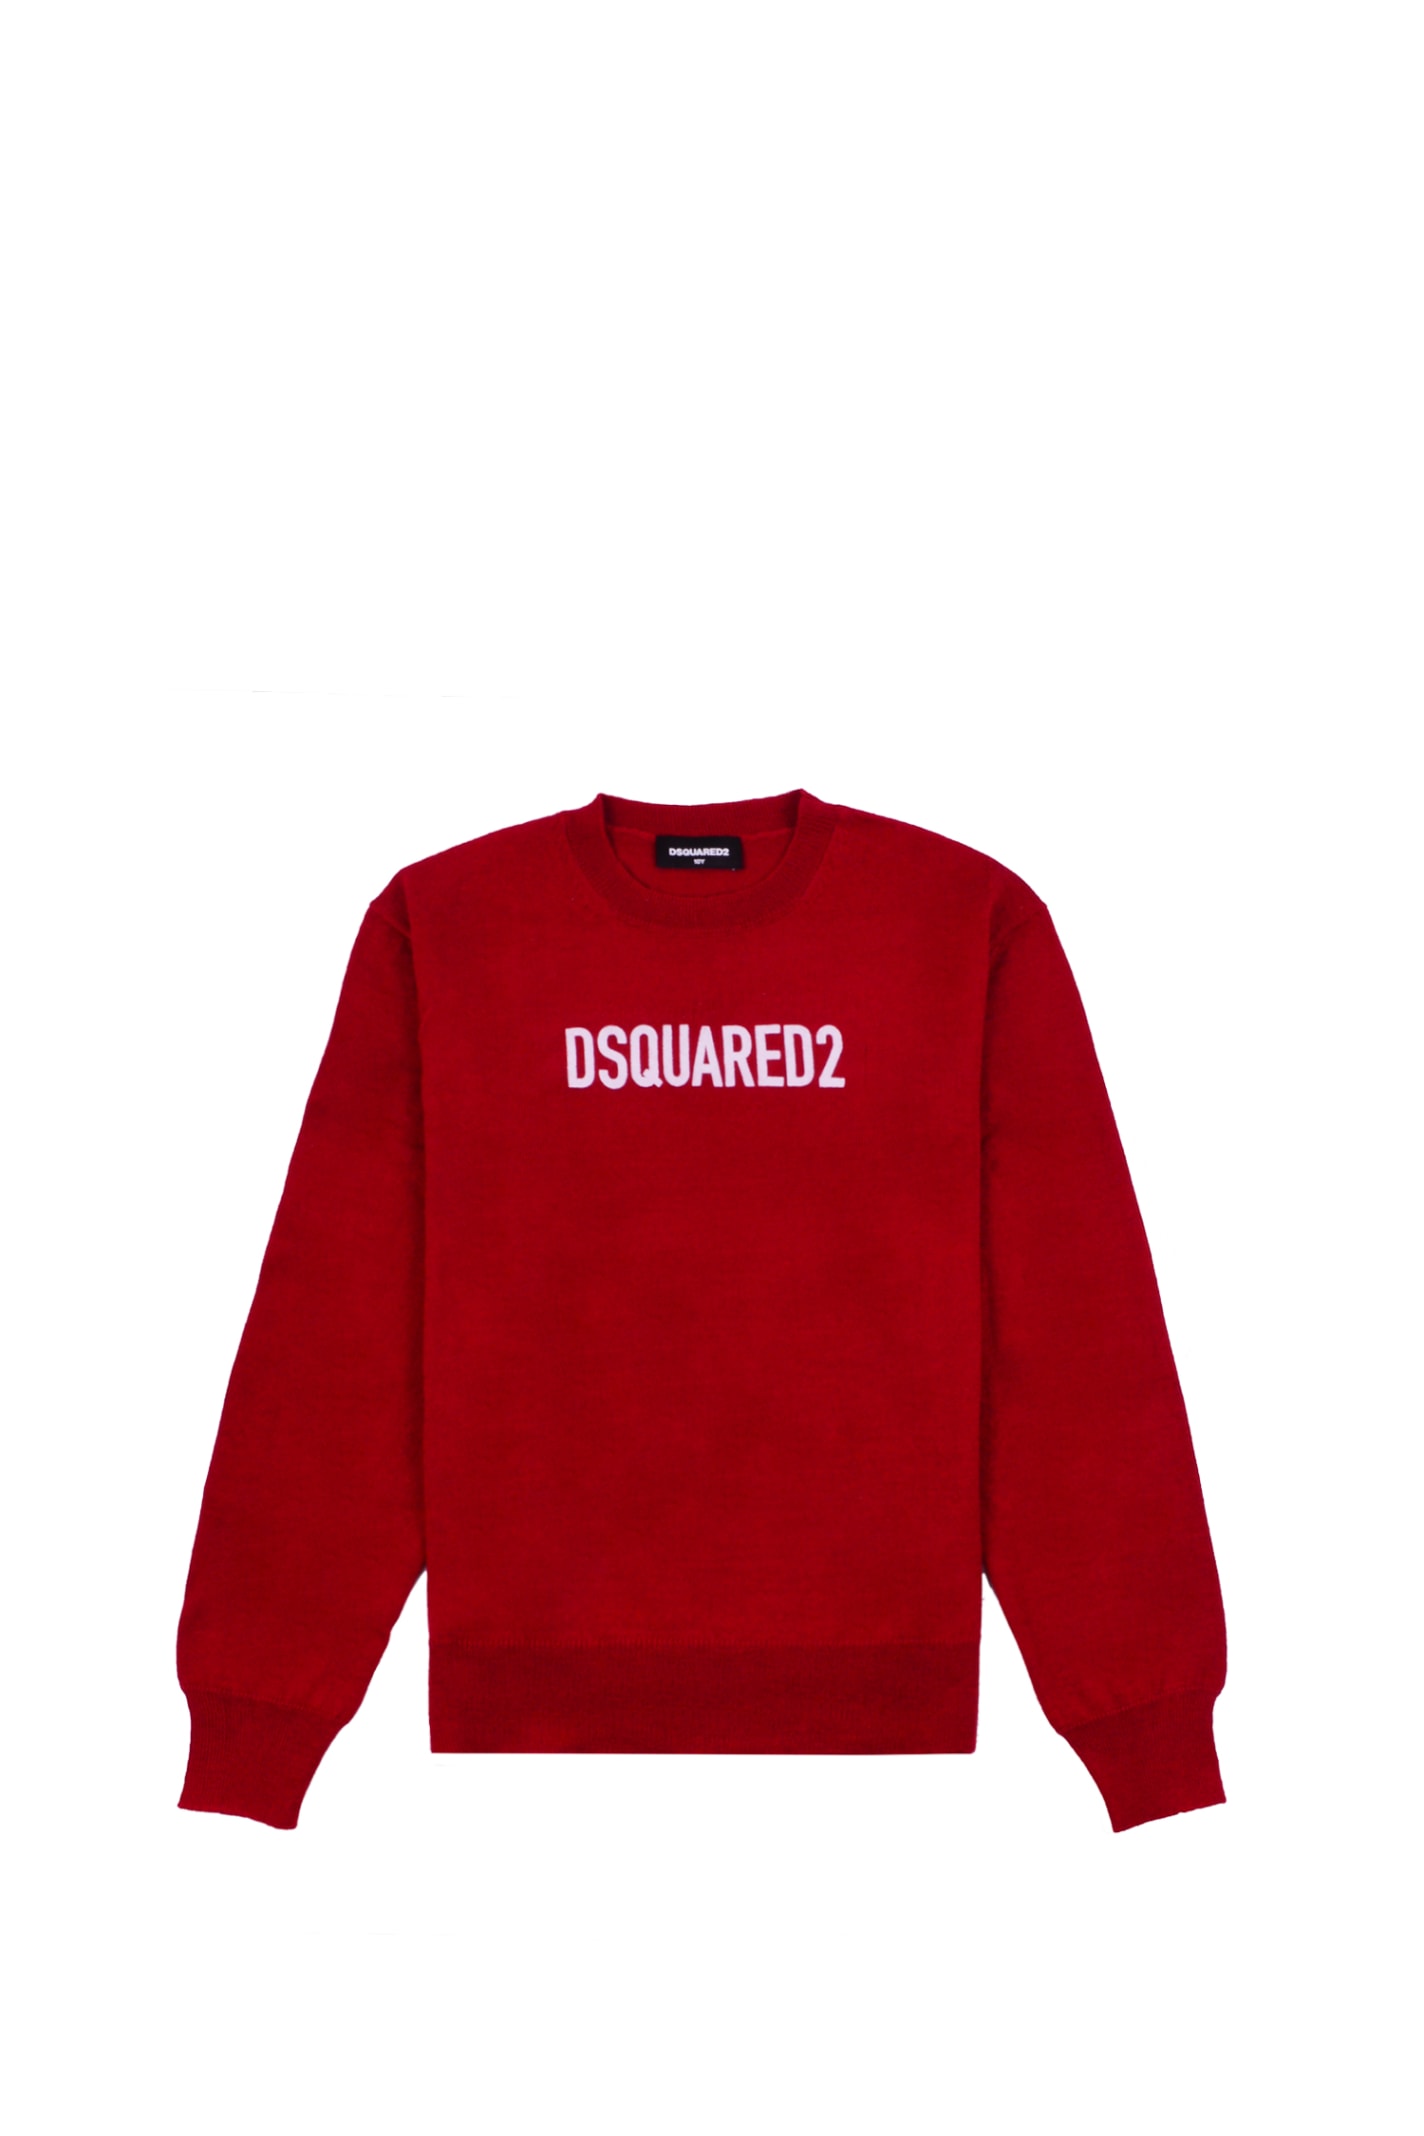 Dsquared2 Wool Blend Sweater